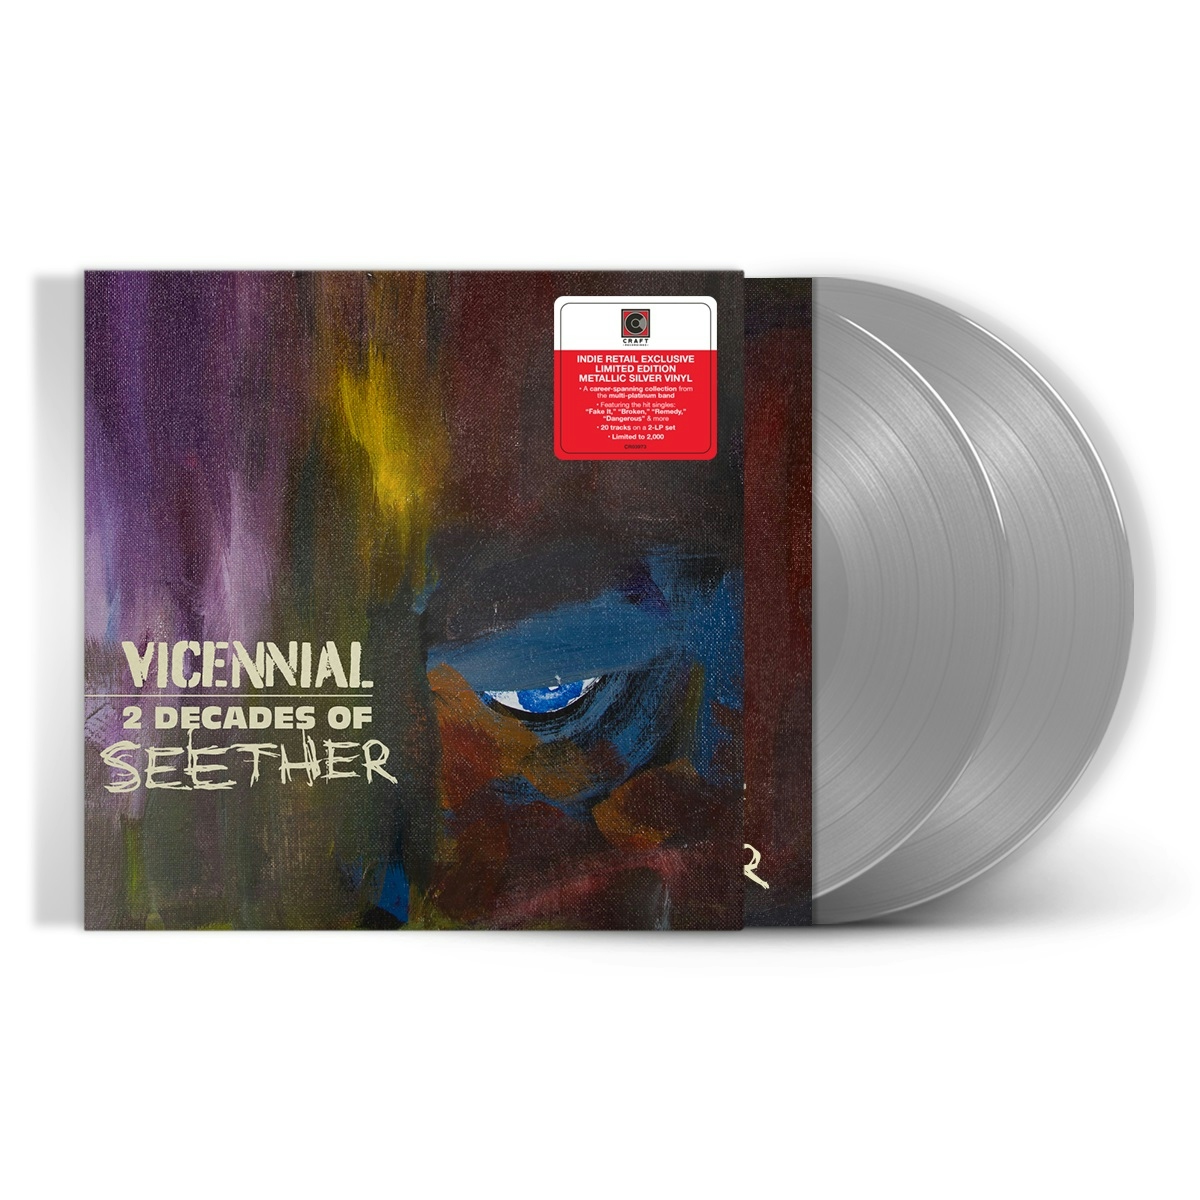 Album artwork for Vicennial: 2 Decades Of Seether by Seether